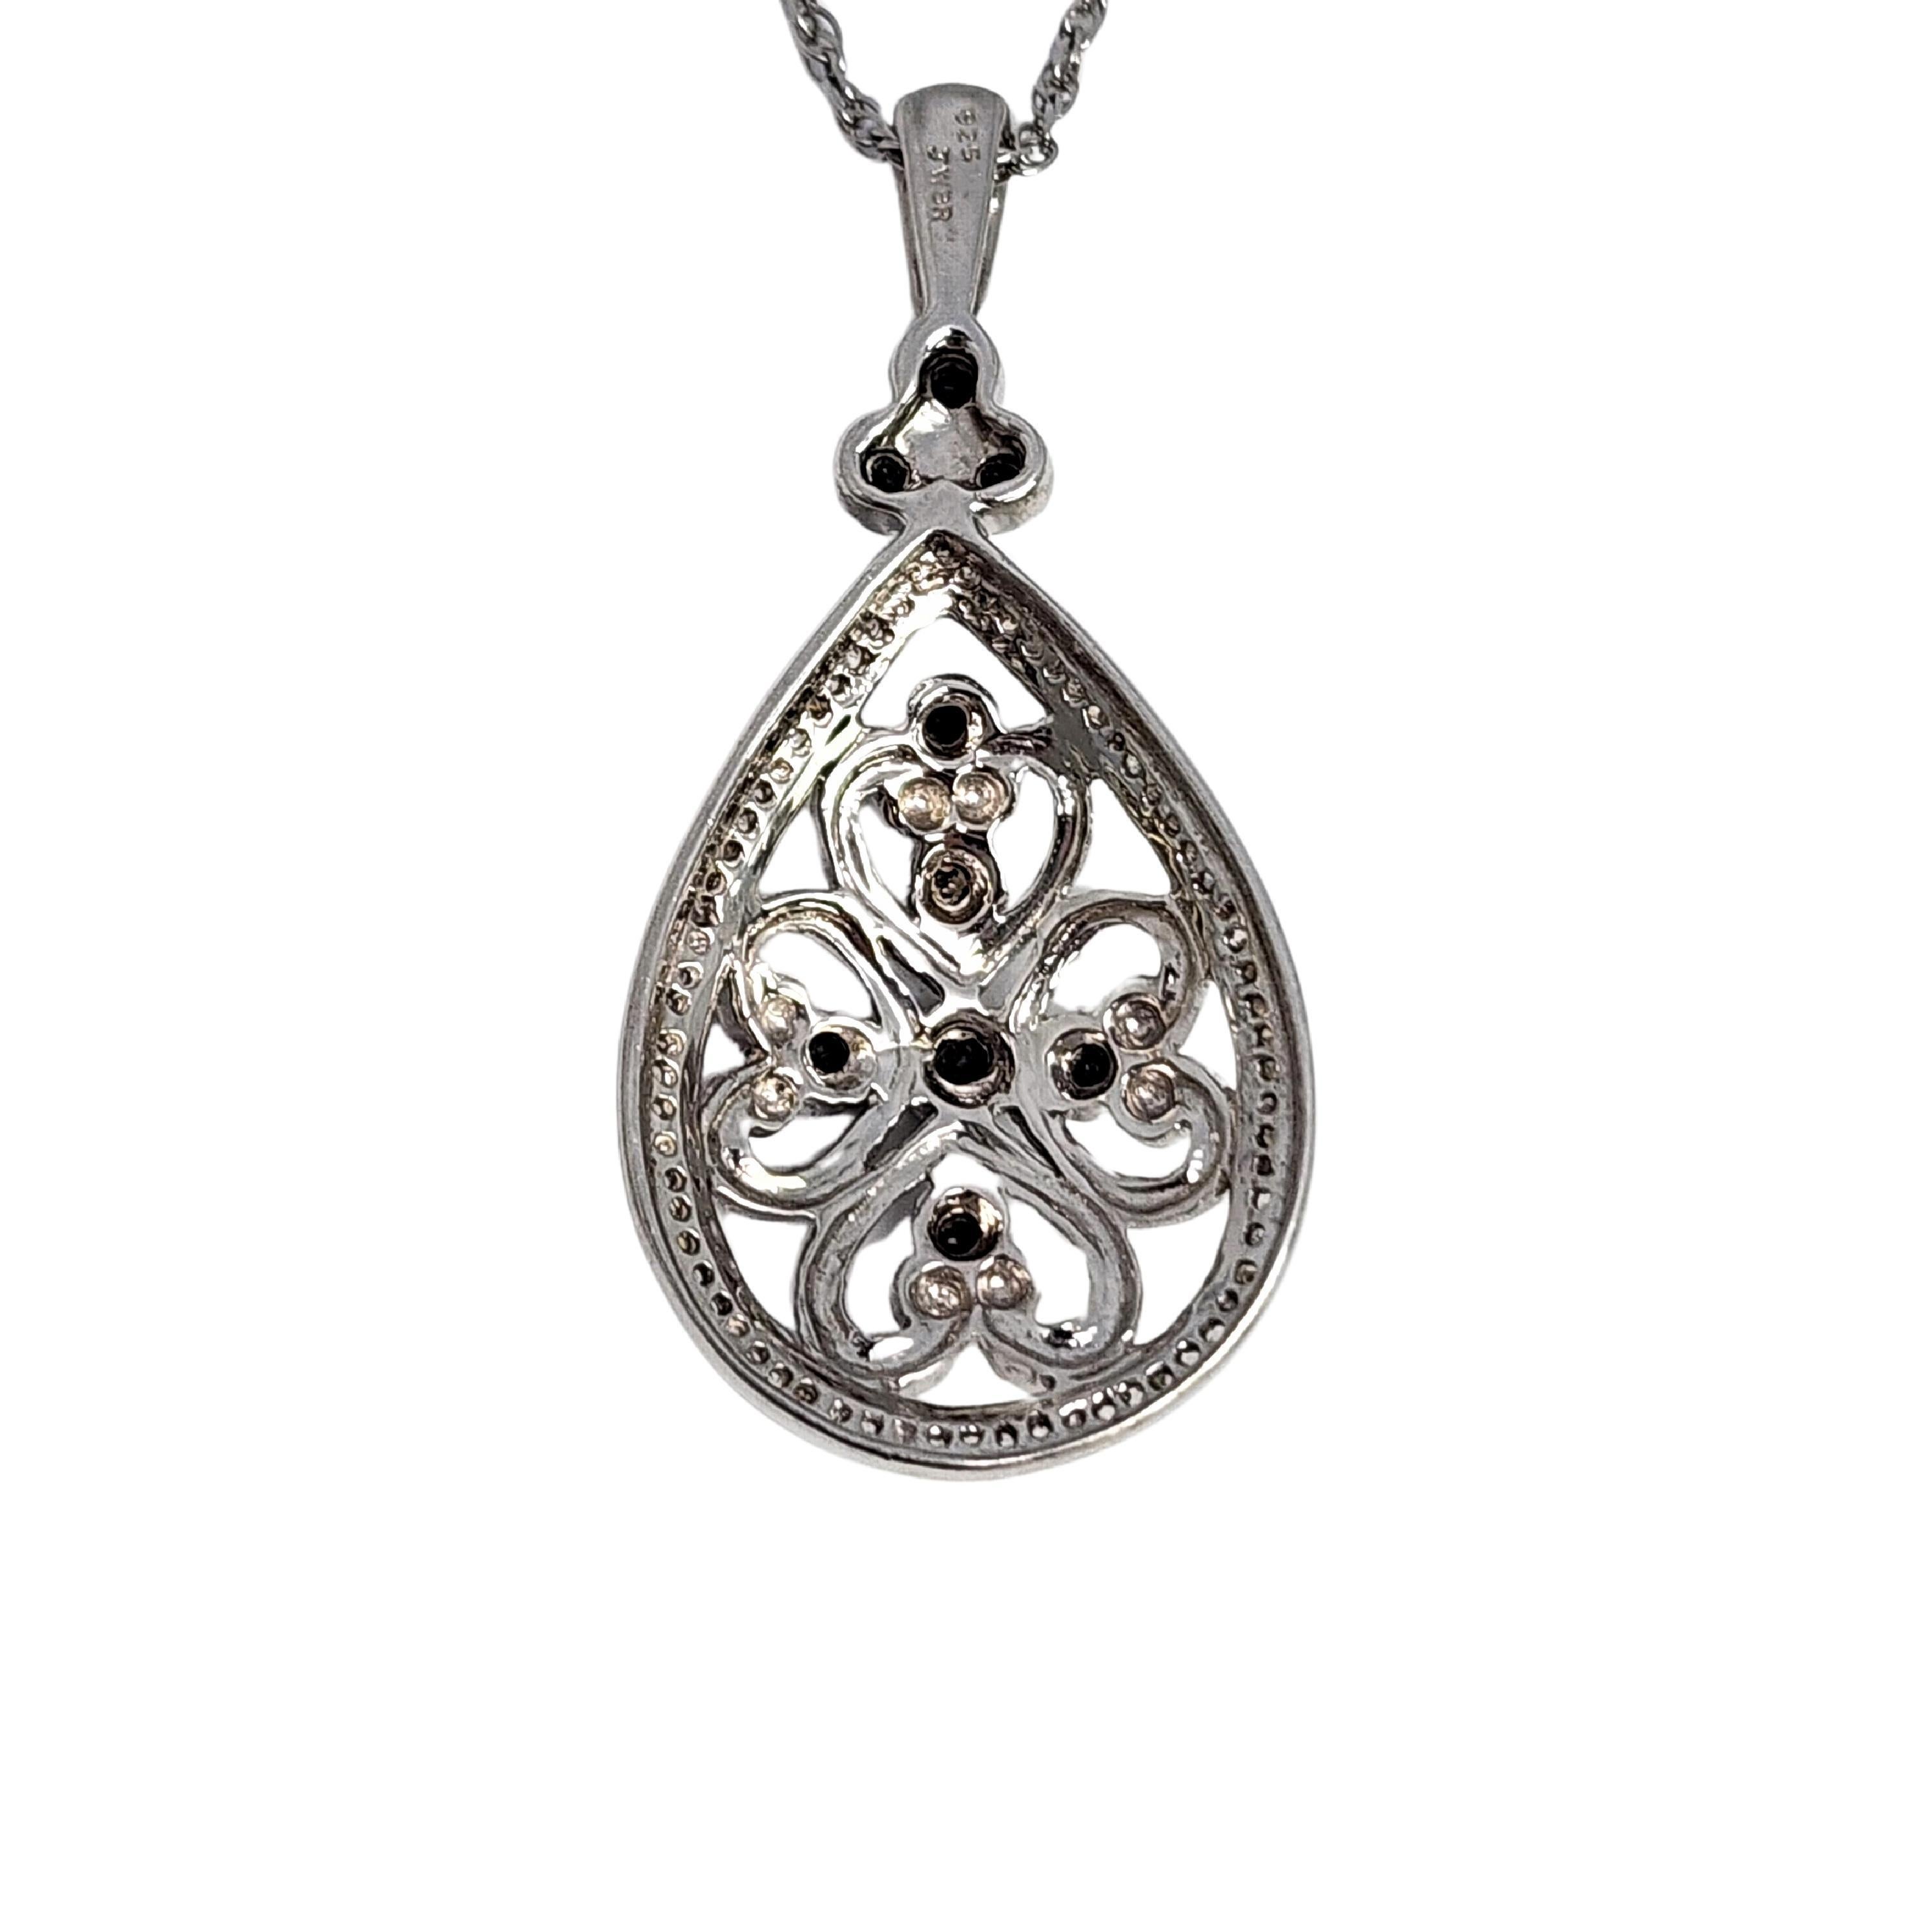 Round Cut Kay Jewelers Sterling Silver Black and White Diamonds Pendant Necklace #17005 For Sale